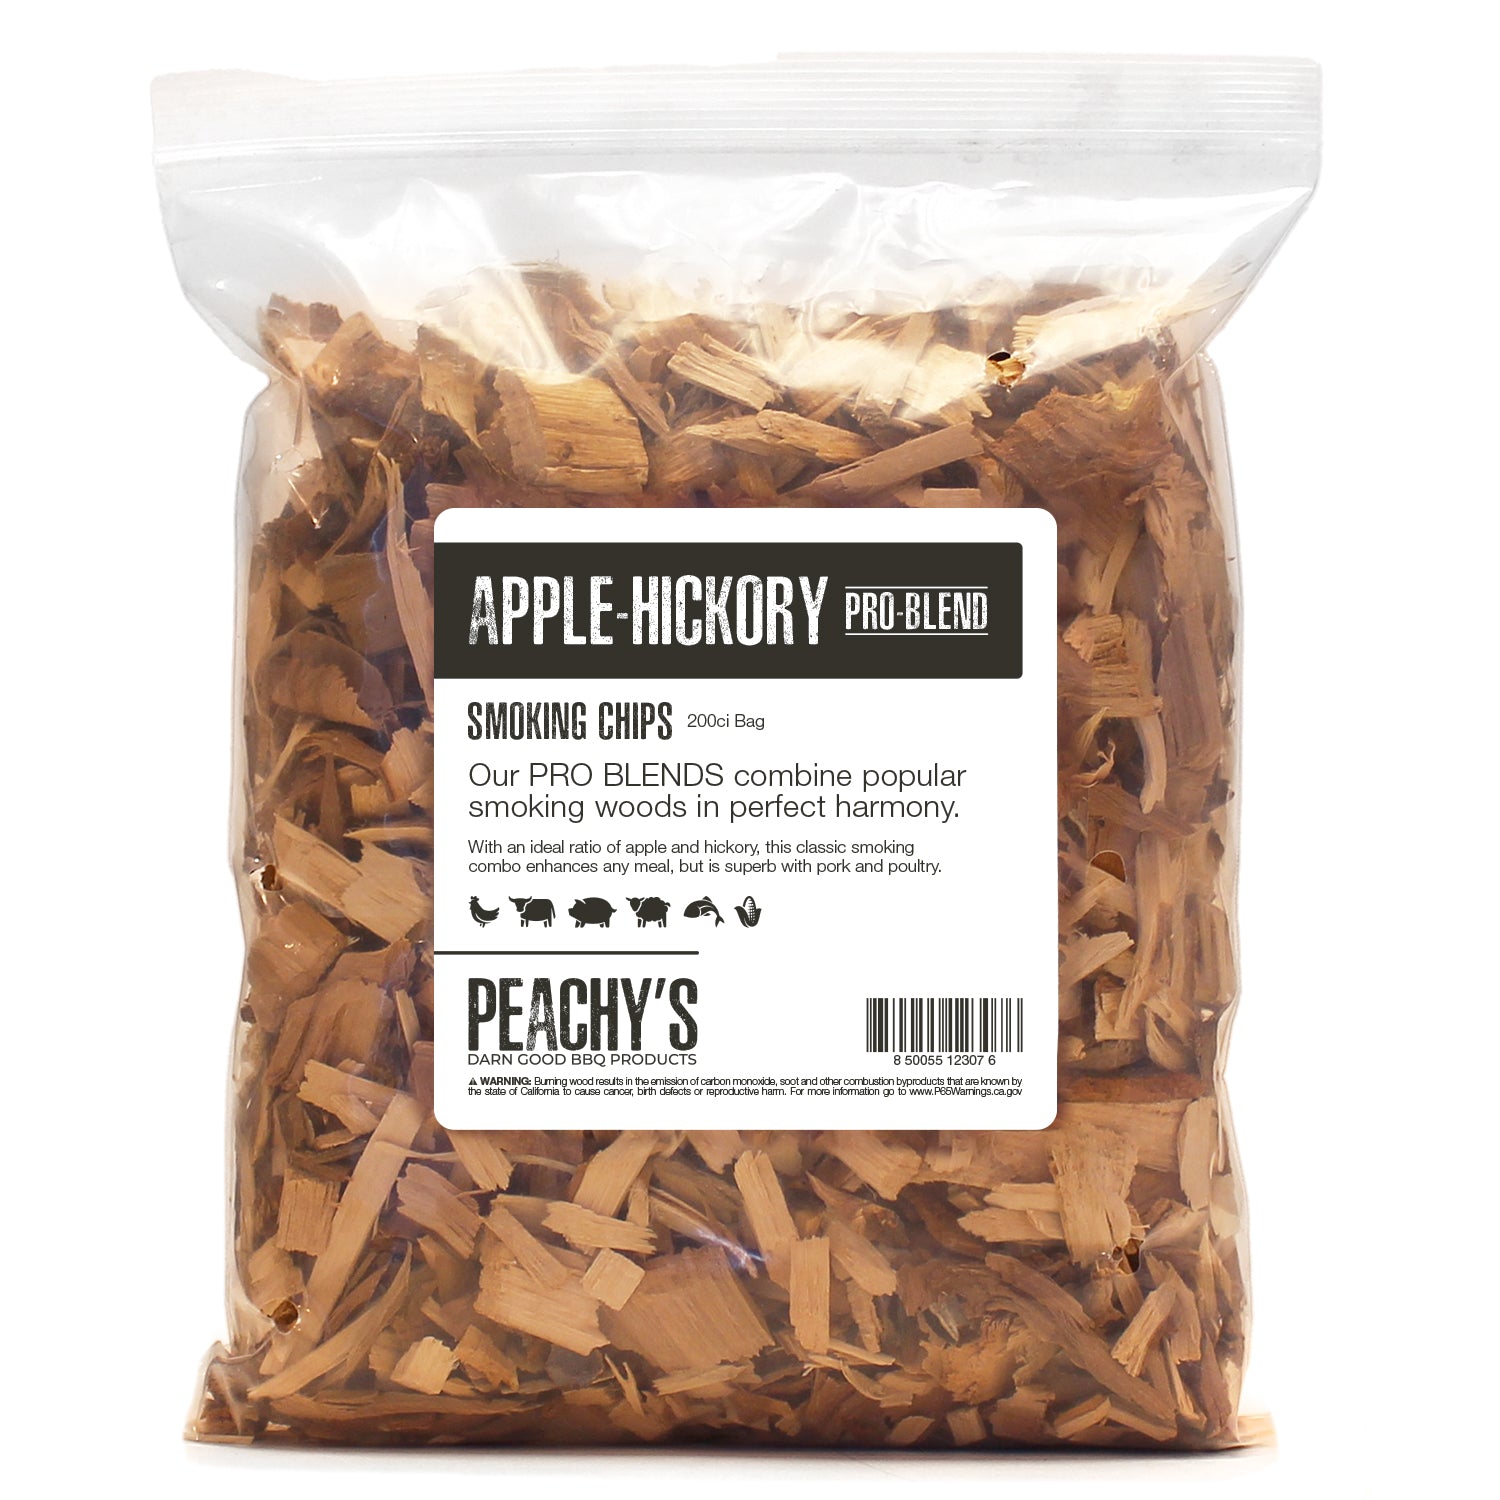 APPLE+HICKORY PRO-BLEND Chips | 200ci Bag of Premium Smoking Woods by PEACHY'S